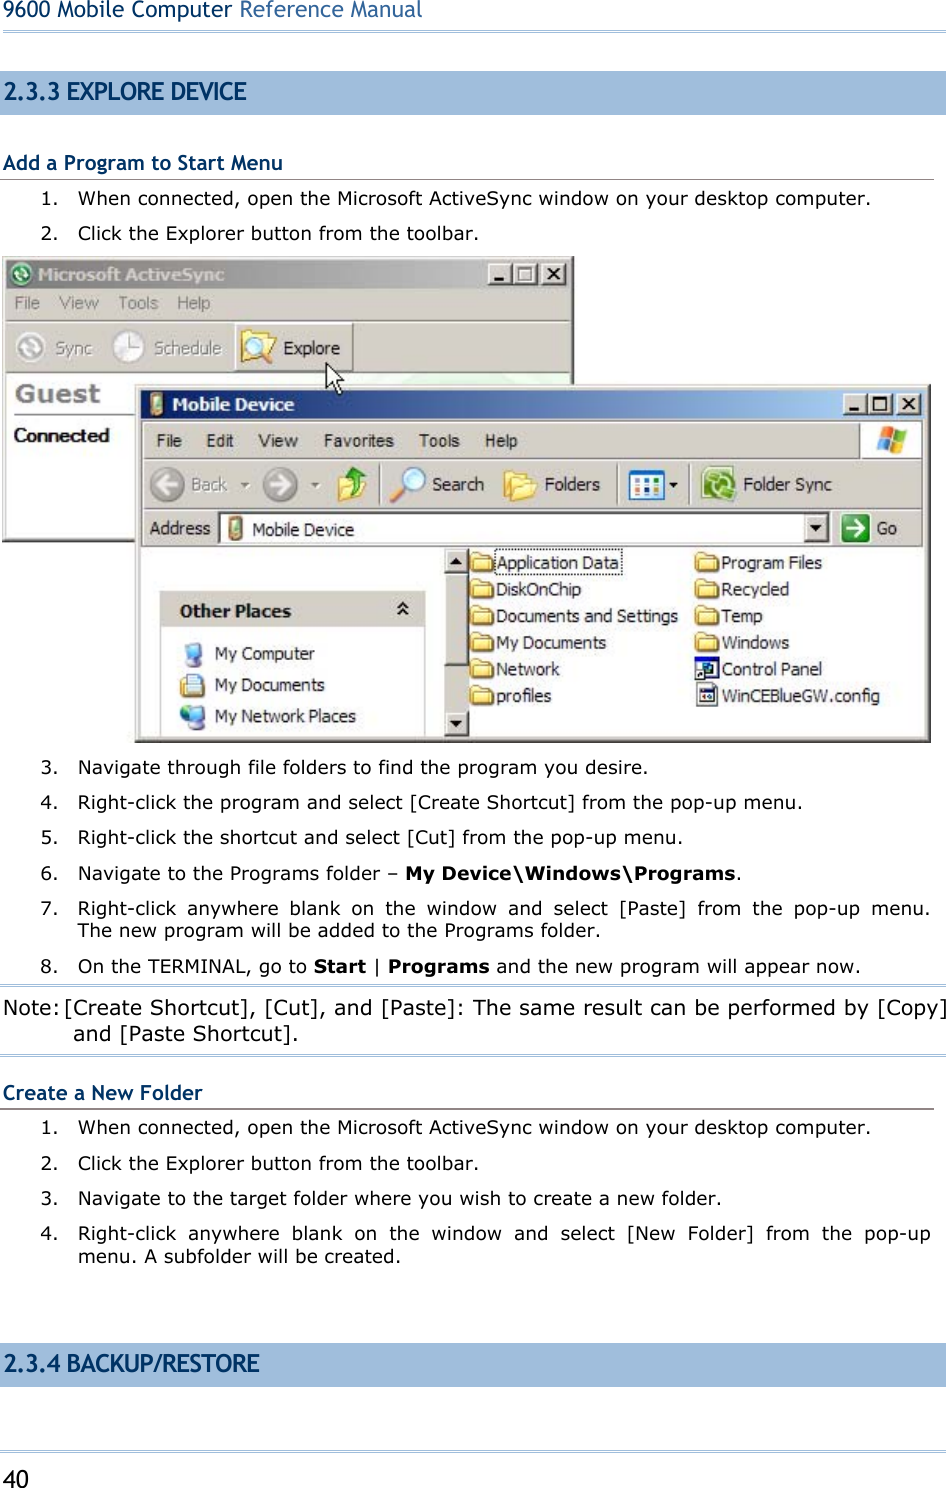 40  9600 Mobile ComputerReference Manual 2.3.3 EXPLORE DEVICE Add a Program to Start Menu 1.  When connected, open the Microsoft ActiveSync window on your desktop computer. 2.  Click the Explorer button from the toolbar. 3.  Navigate through file folders to find the program you desire. 4.  Right-click the program and select [Create Shortcut] from the pop-up menu. 5.  Right-click the shortcut and select [Cut] from the pop-up menu. 6.  Navigate to the Programs folder – My Device\Windows\Programs. 7.  Right-click anywhere blank on the window and select [Paste] from the pop-up menu.  The new program will be added to the Programs folder. 8.  On the TERMINAL, go to Start | Programs and the new program will appear now. Note: [Create Shortcut], [Cut], and [Paste]: The same result can be performed by [Copy] and [Paste Shortcut]. Create a New Folder 1.  When connected, open the Microsoft ActiveSync window on your desktop computer. 2.  Click the Explorer button from the toolbar. 3.  Navigate to the target folder where you wish to create a new folder. 4.  Right-click anywhere blank on the window and select [New Folder] from the pop-up menu. A subfolder will be created.   2.3.4 BACKUP/RESTORE 